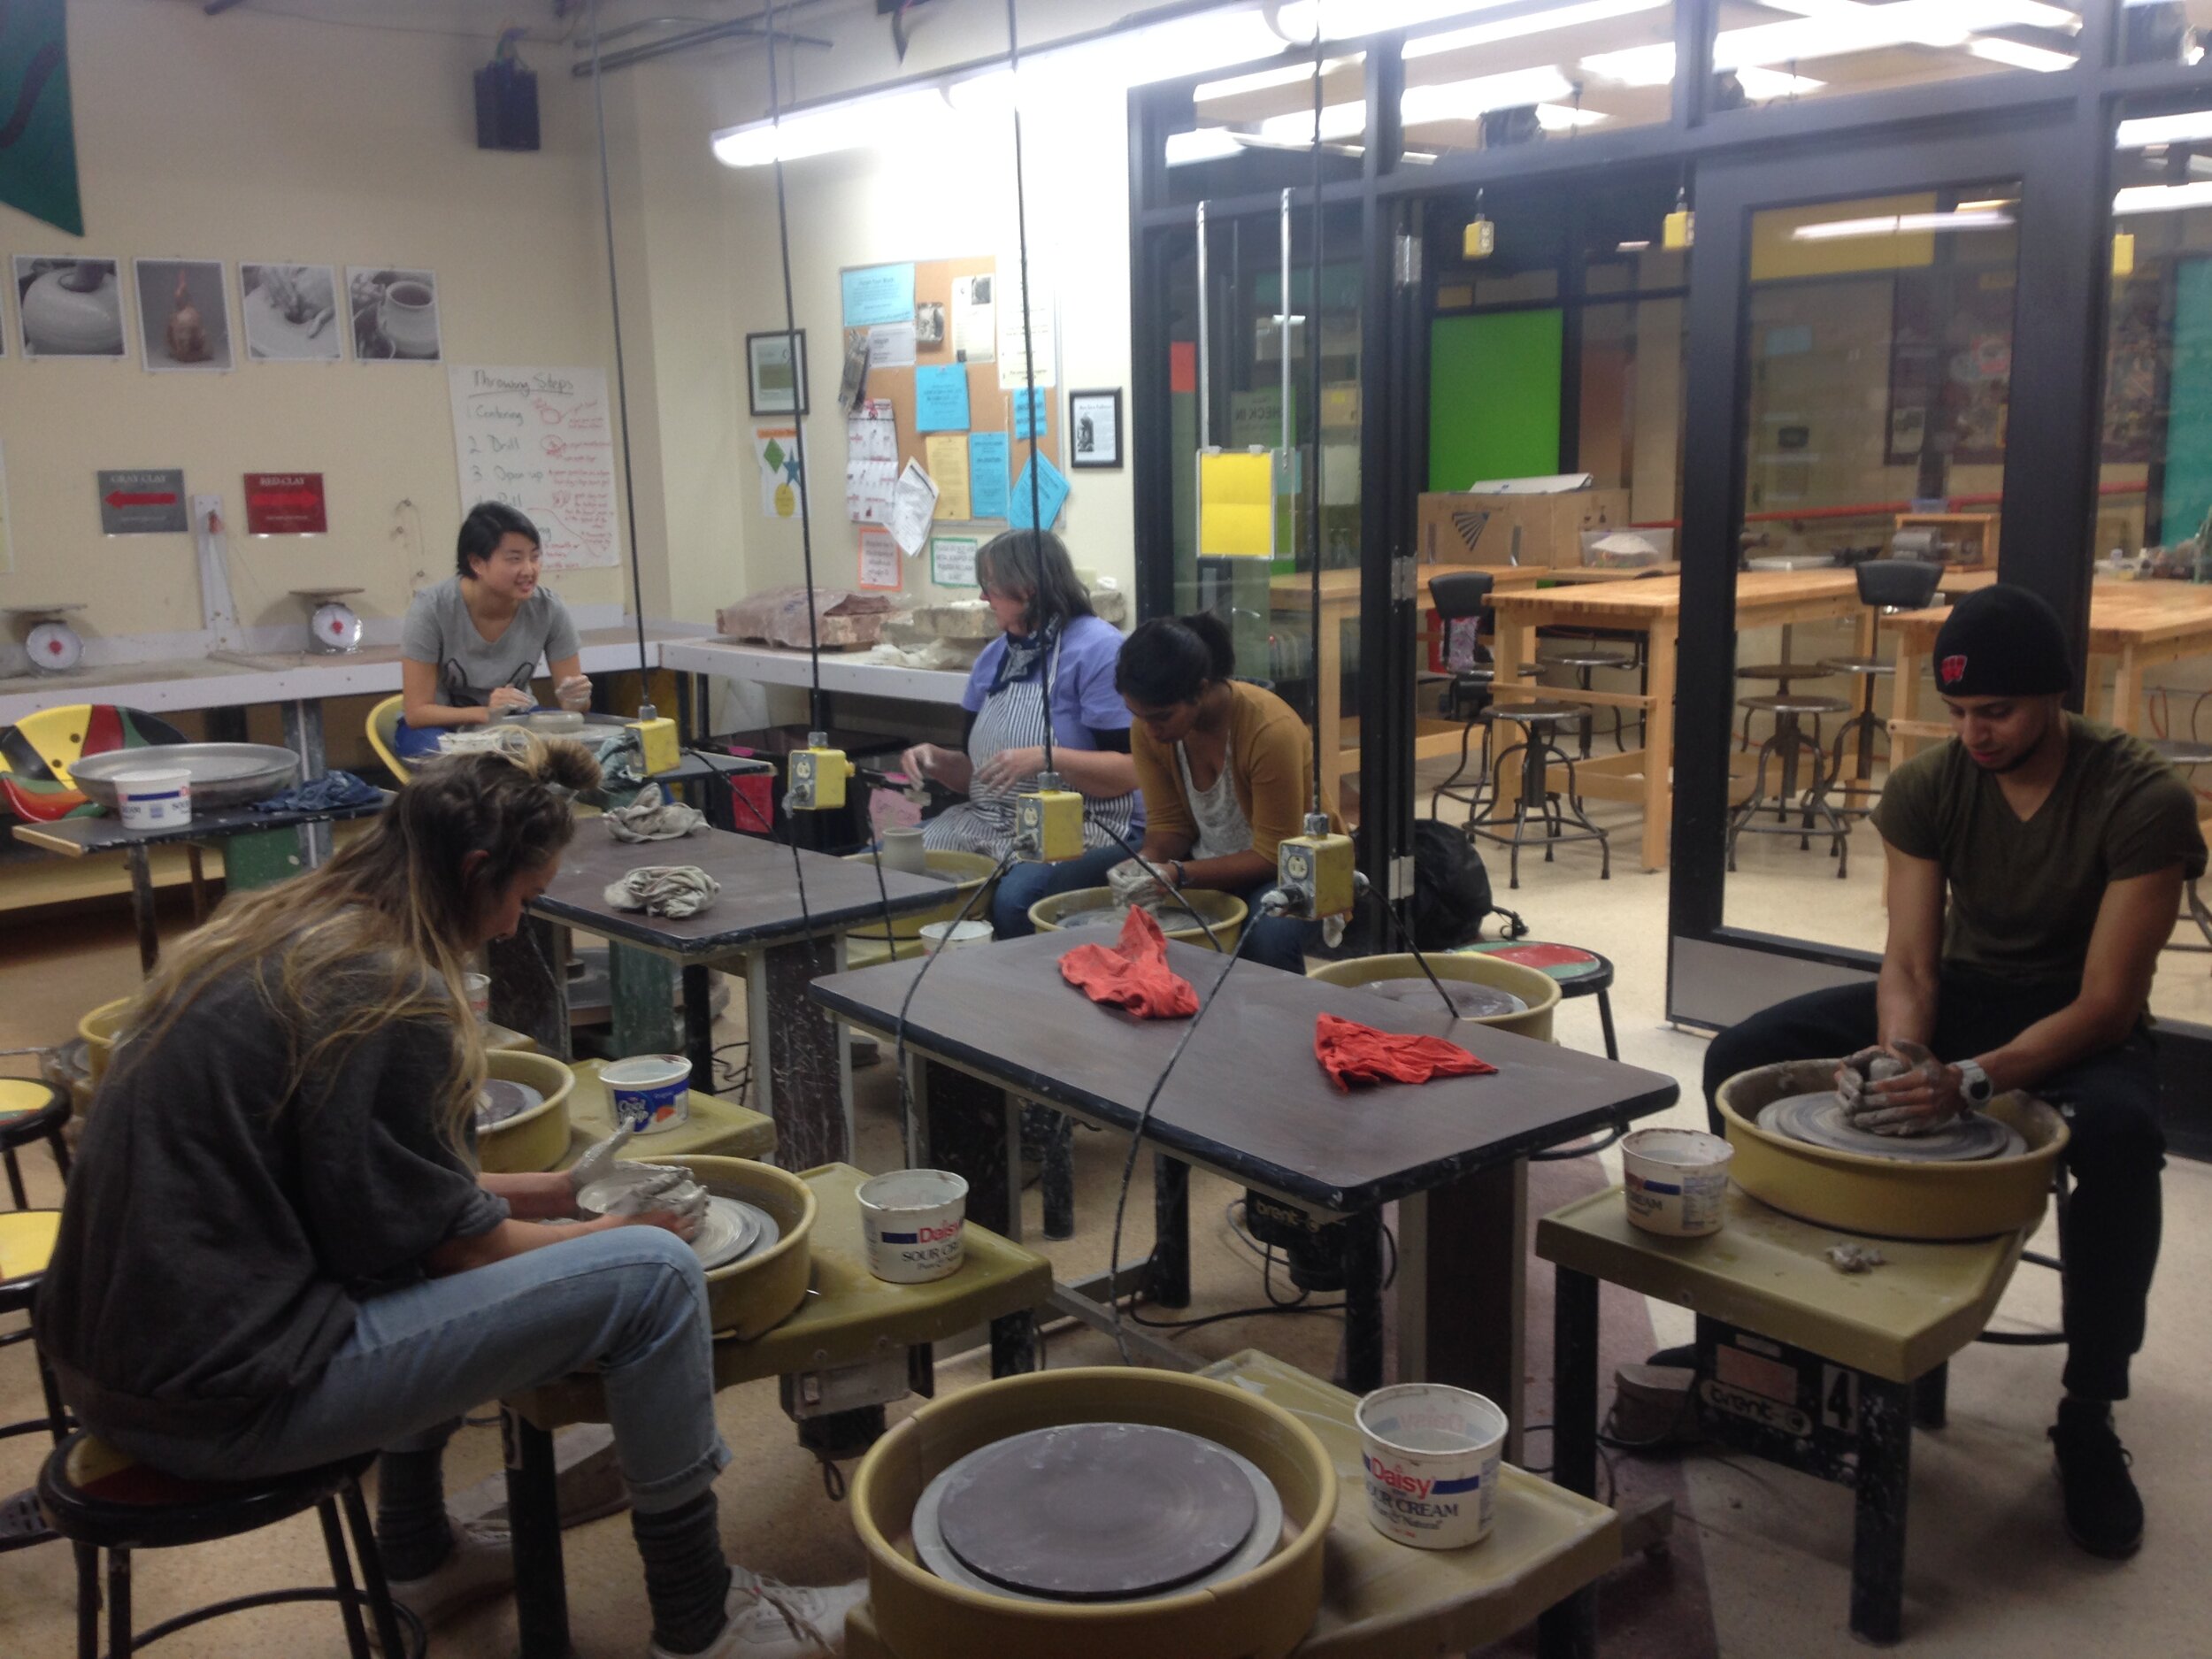 Pottery Workshop at the Wheelhouse Studios (UW Madison) - Introduction to East Asian Religions (Fall 2015)